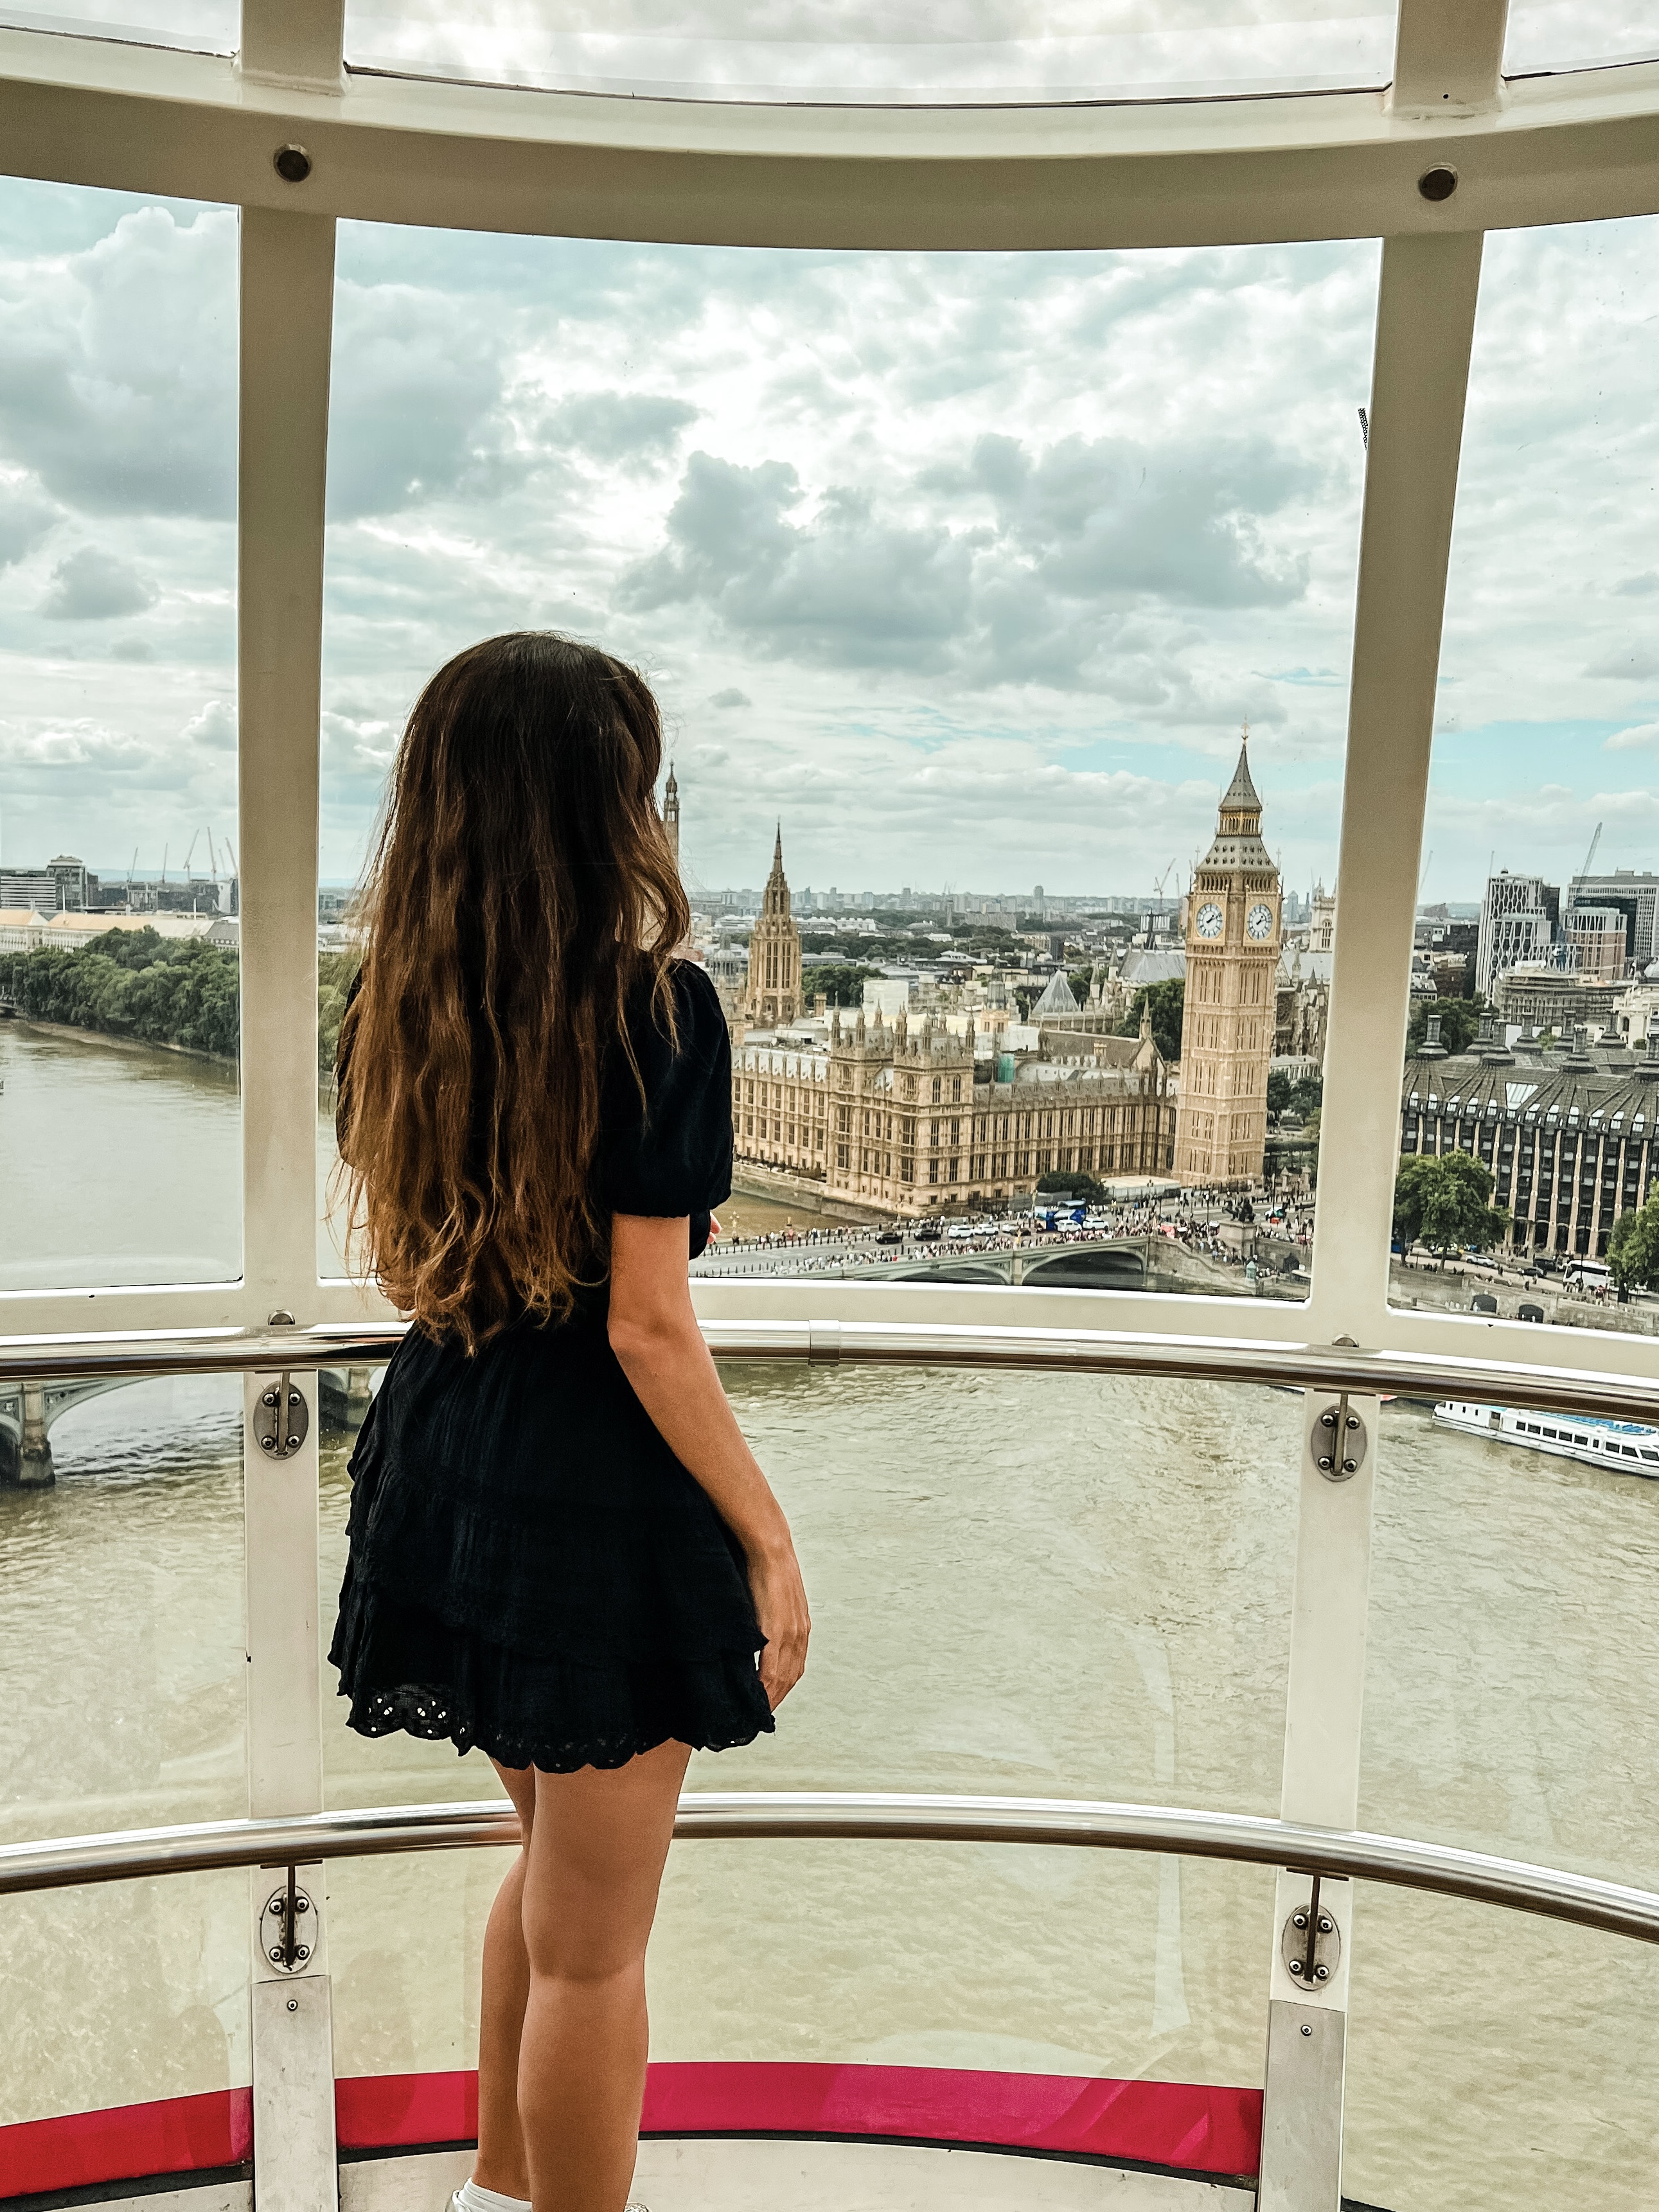 views from the London Eye